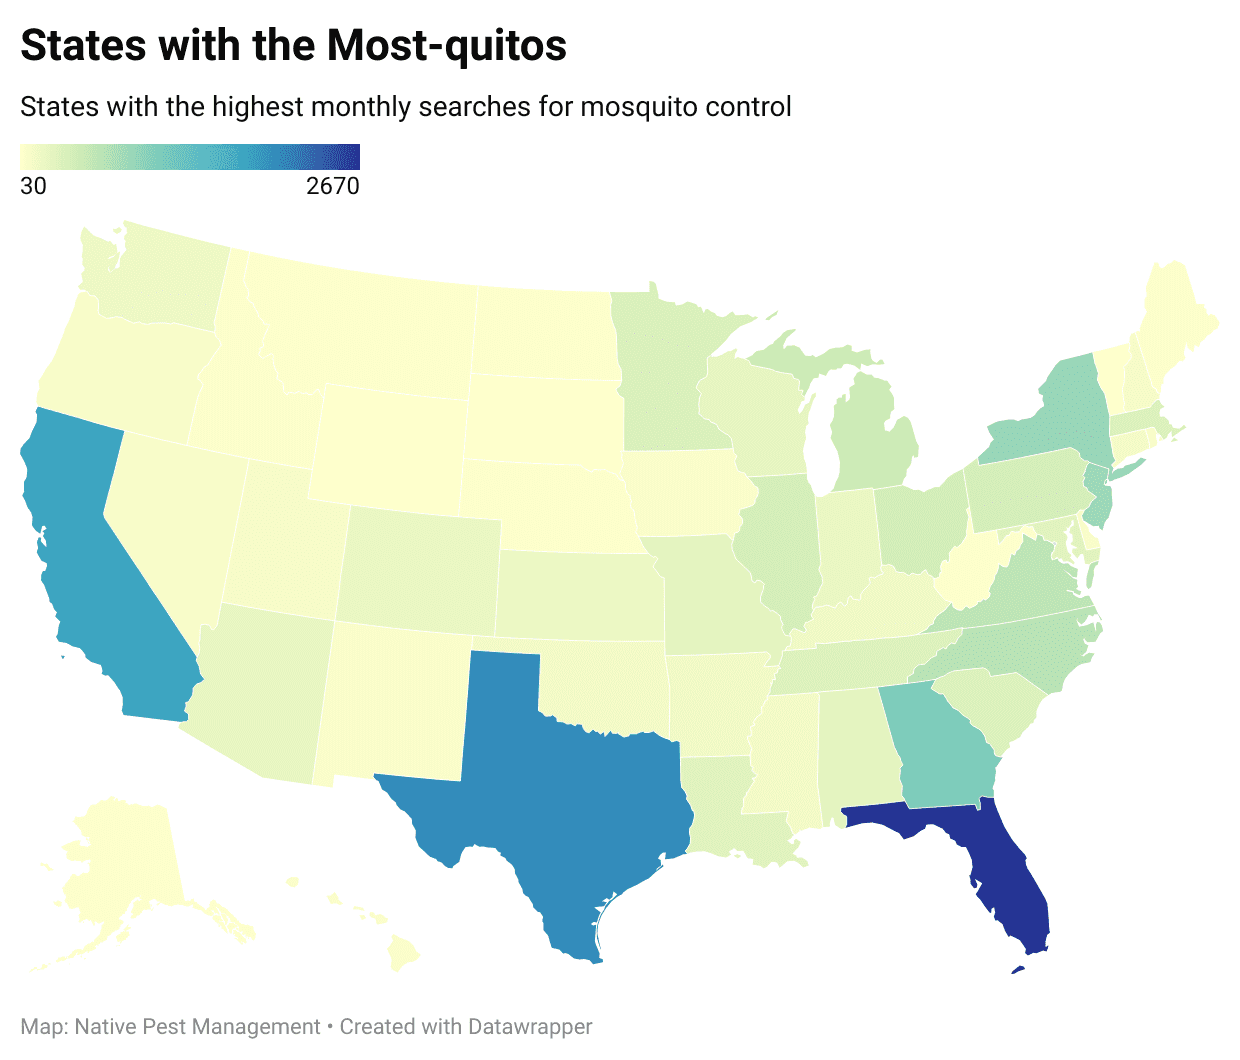 states with the most-quitos